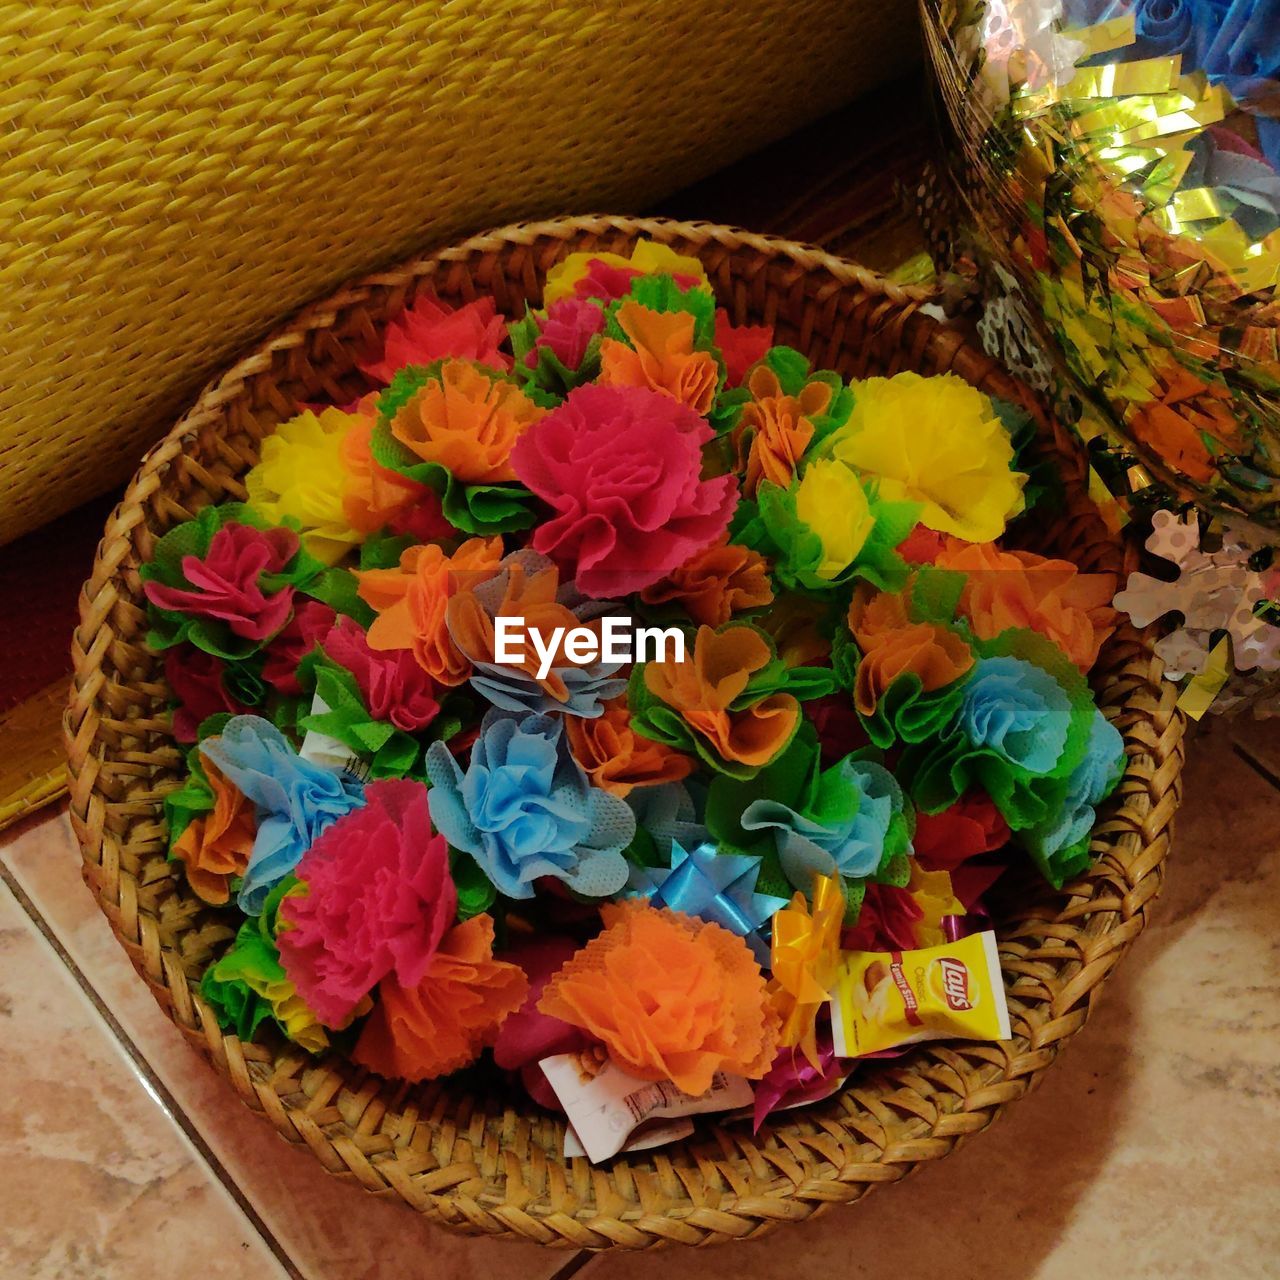 HIGH ANGLE VIEW OF MULTI COLORED FLOWER IN BASKET ON TABLE